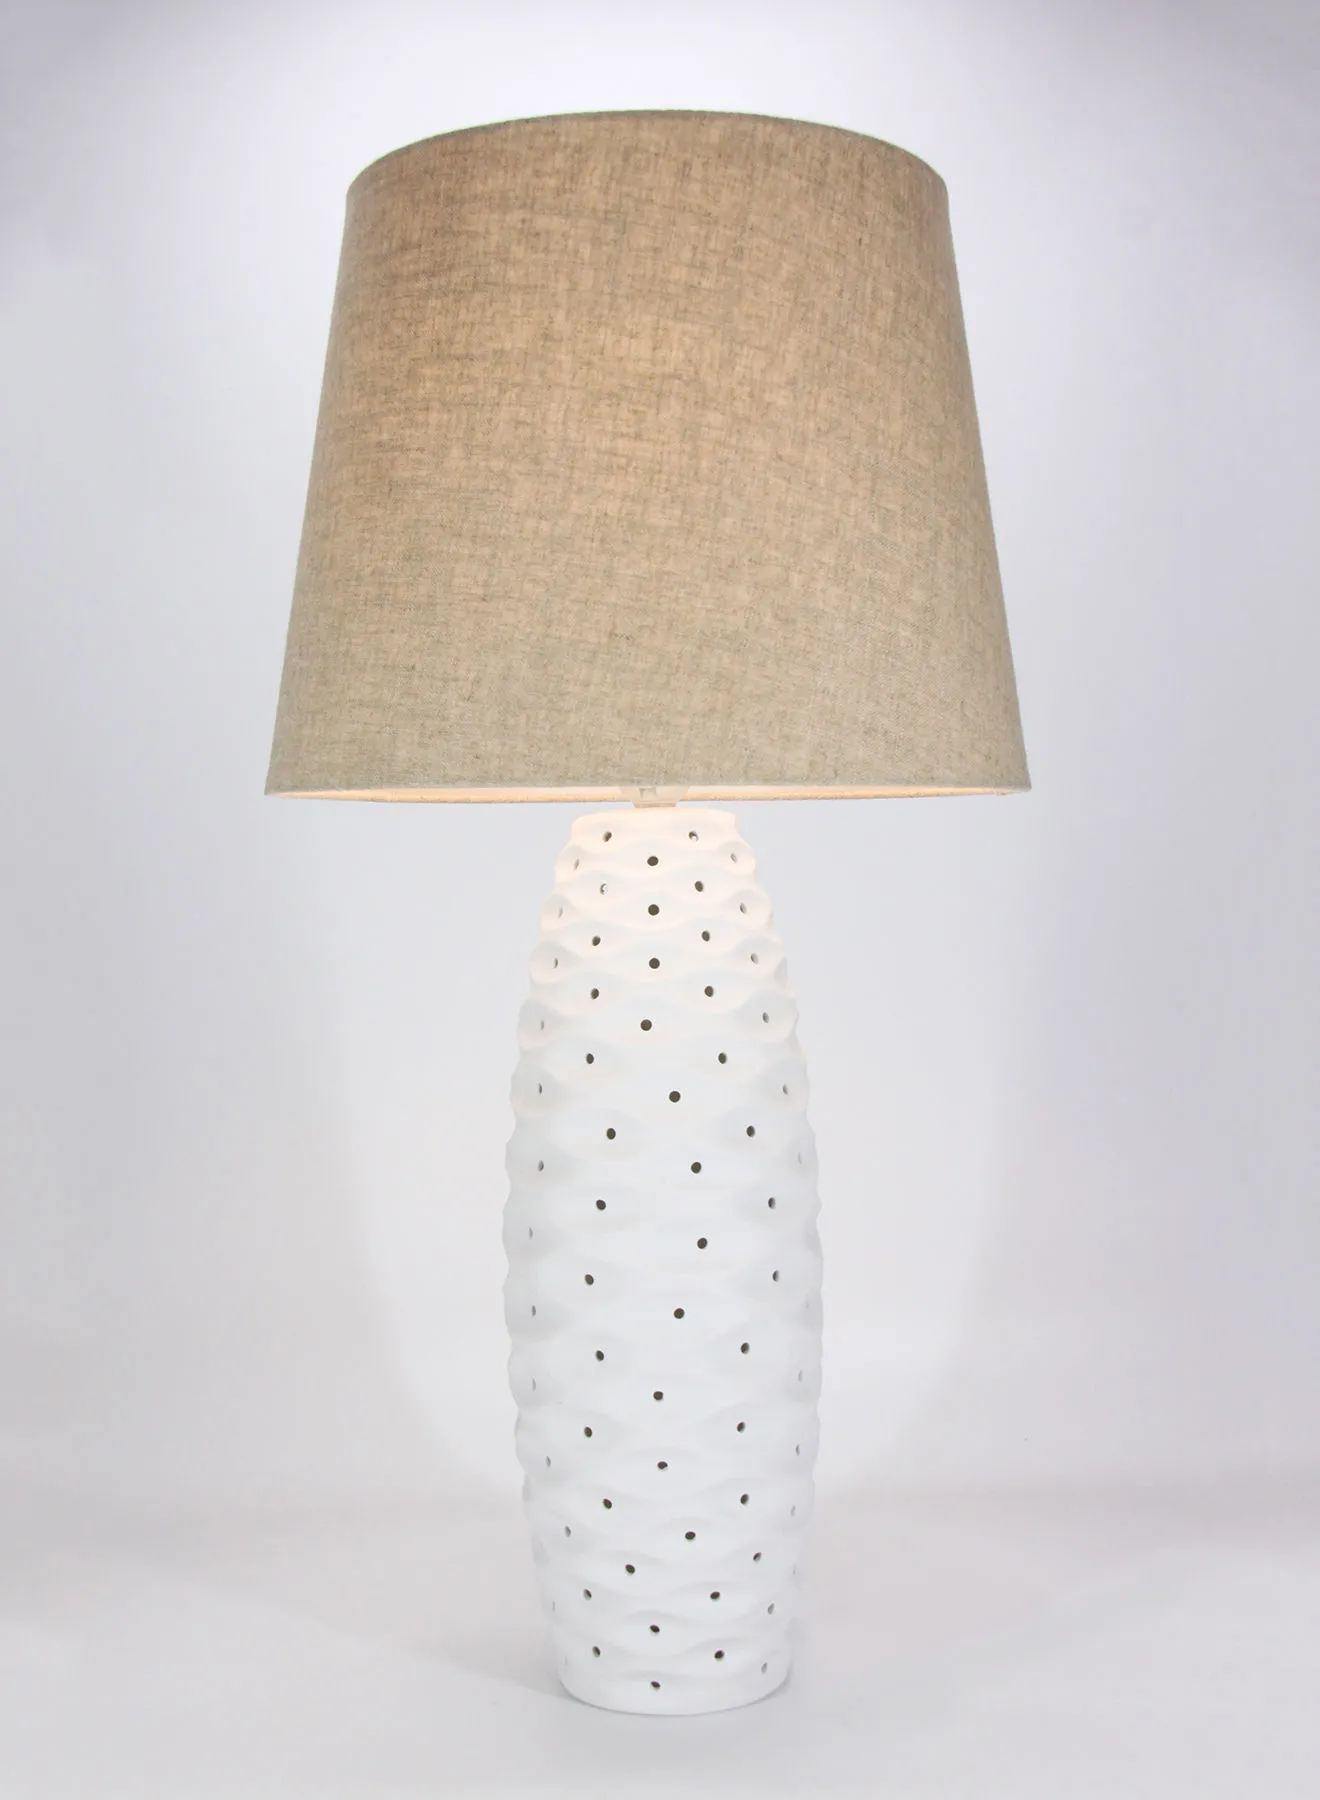 Switch Nest Porcelain Table Lamp | Lampshade Unique Luxury Quality Material for the Perfect Stylish Home D152-52 White 36 x 36 x 70 White 36 x 36 x 70cm